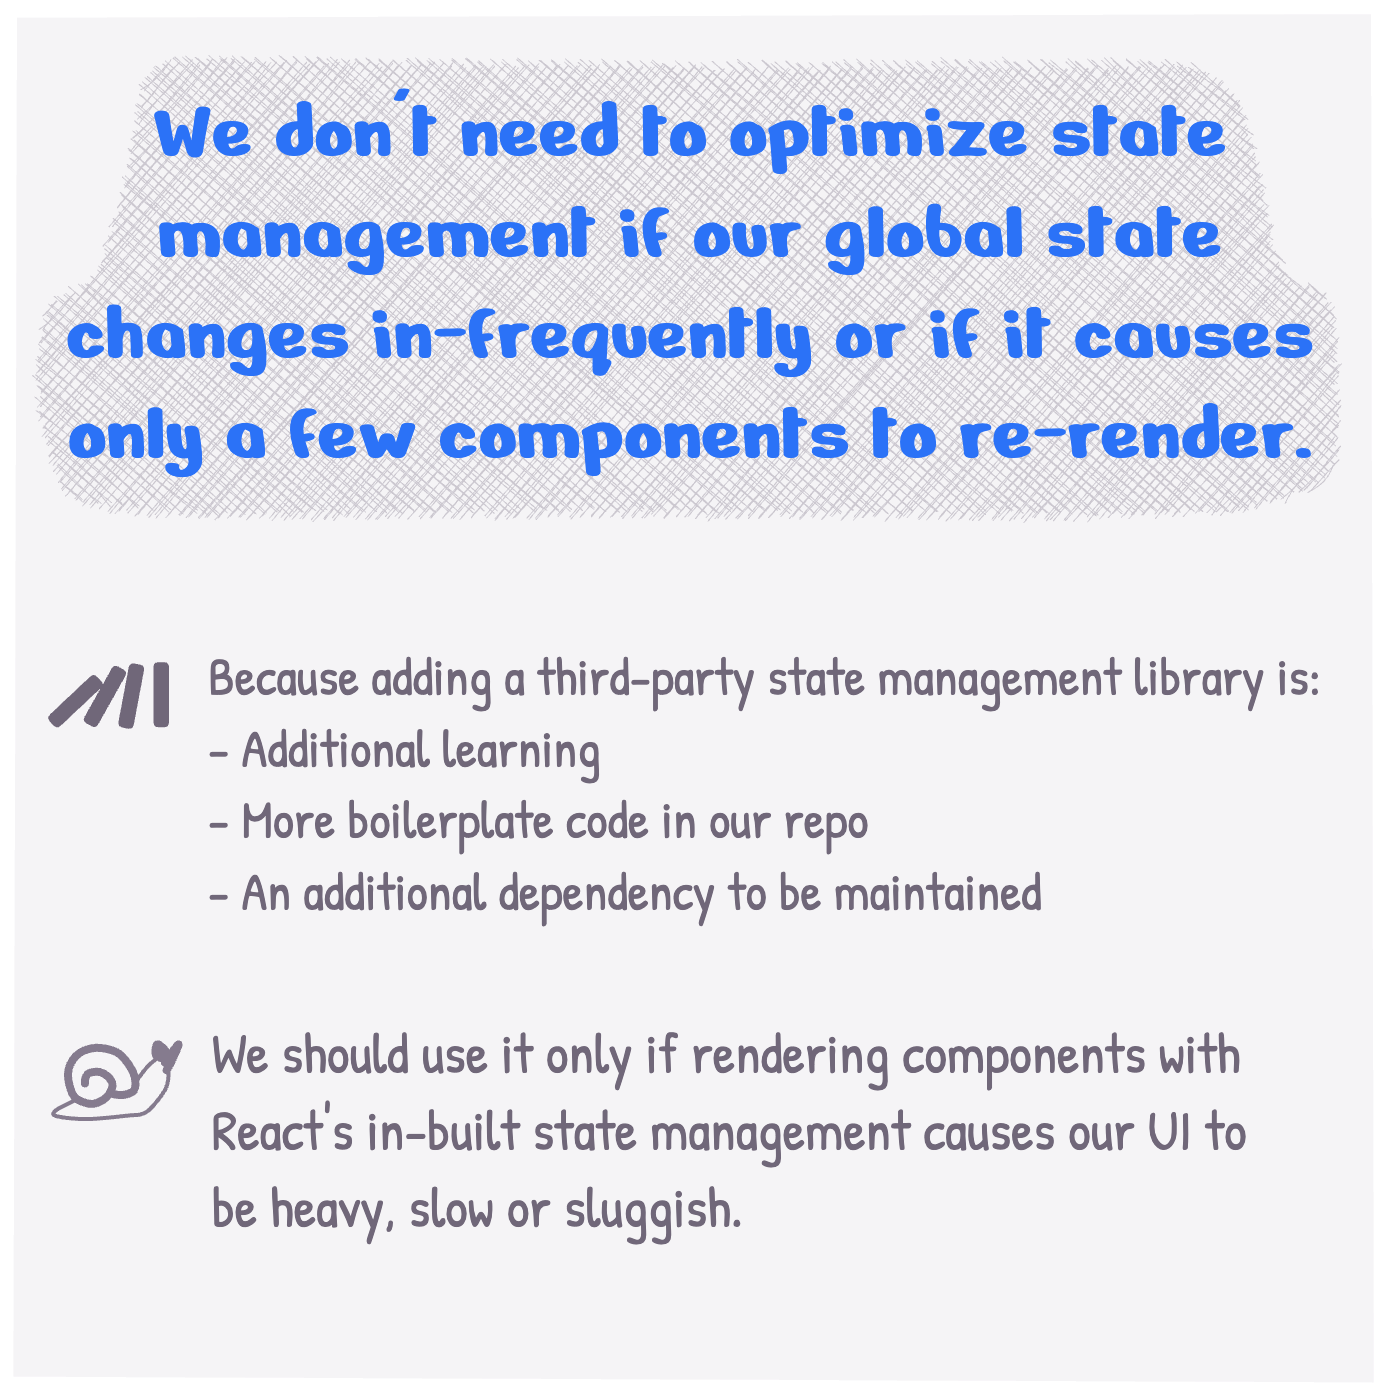 We don't need to optimize state management if our global state changes in-frequently or if it causes only a few components to re-render.